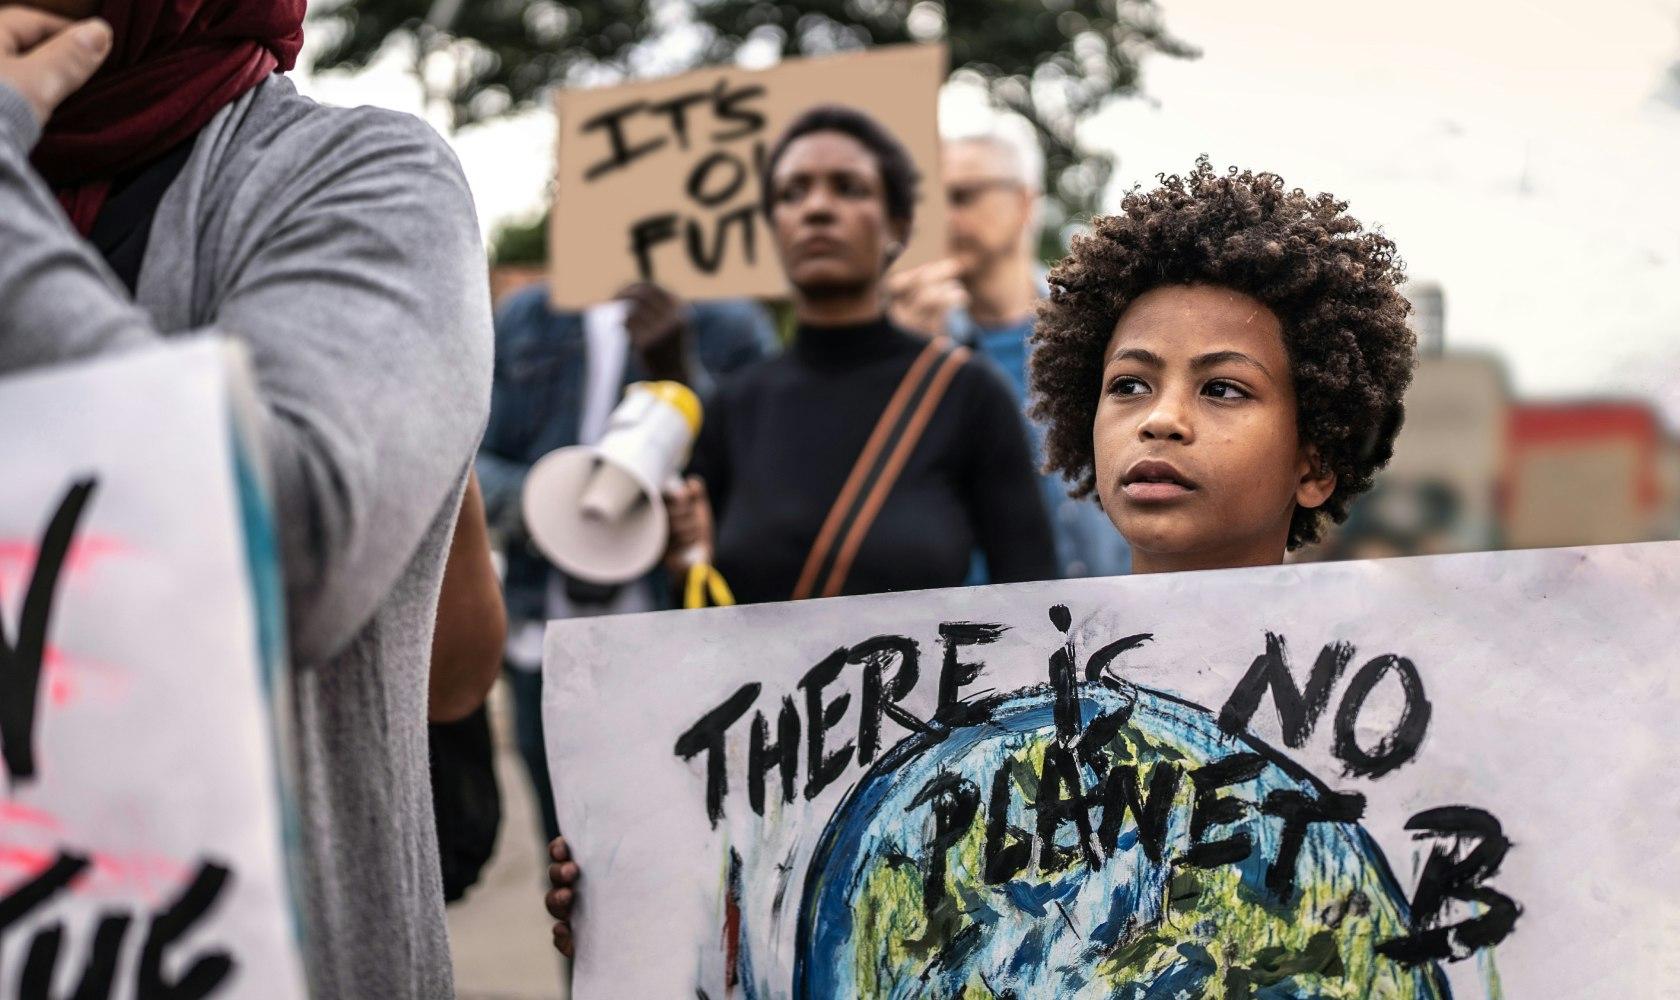 Child holding sign that says 'There is no Planet B'